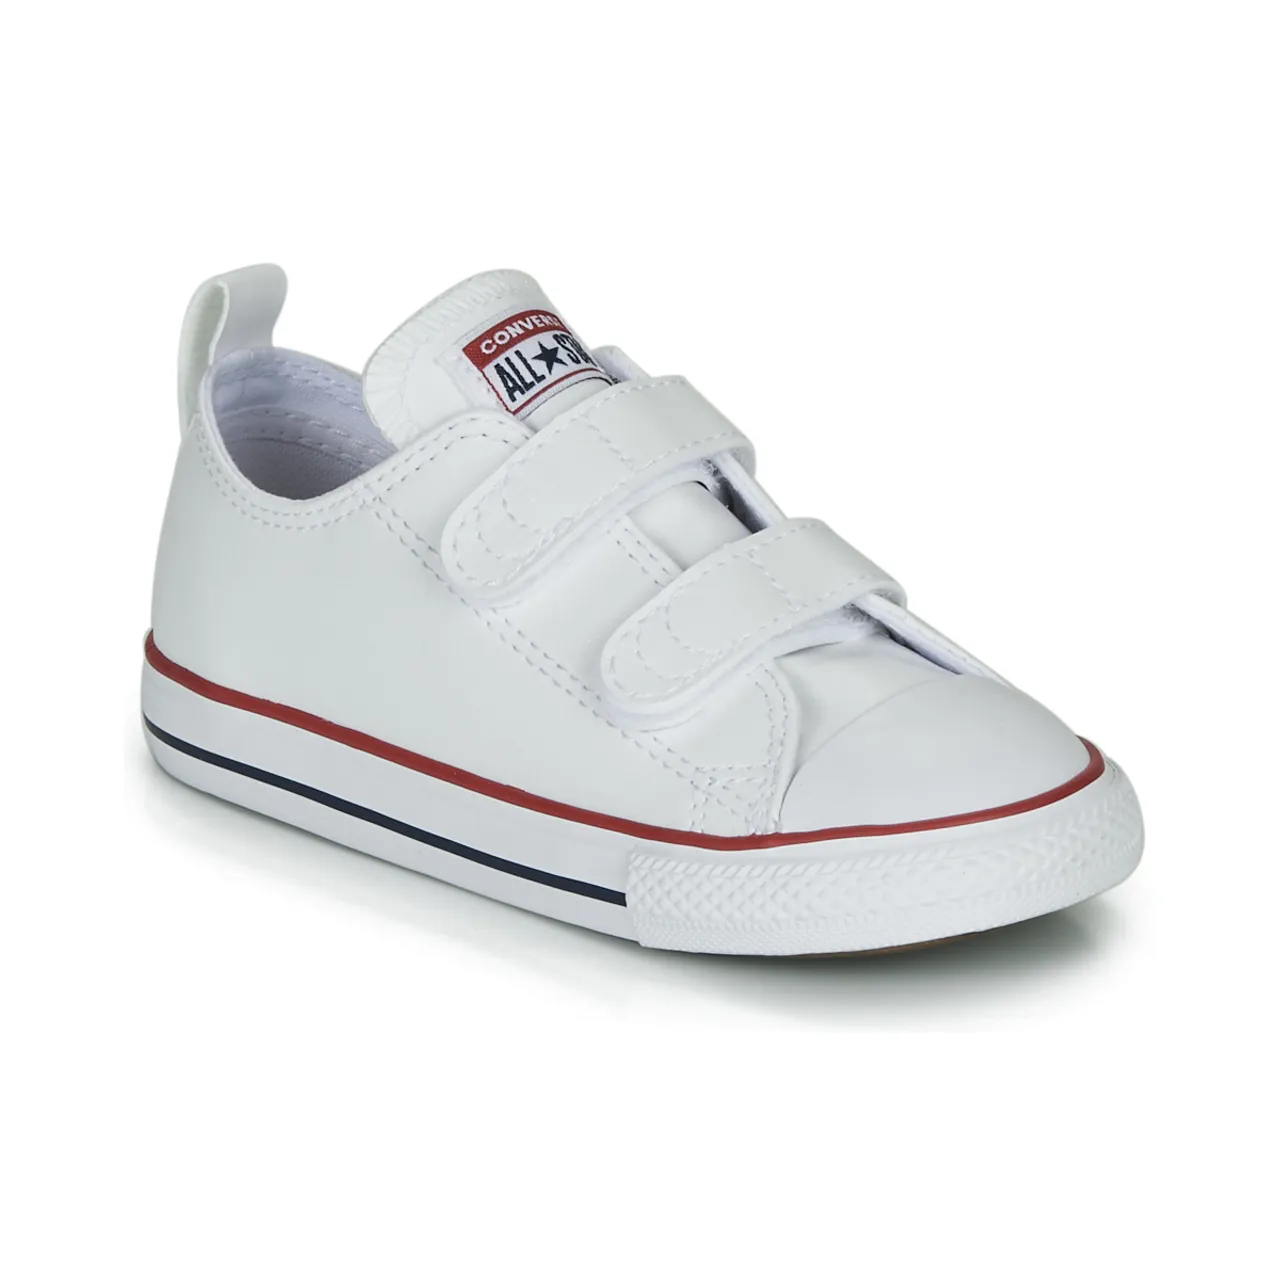 Converse  CHUCK TAYLOR ALL STAR 2V - OX  boys's Children's Shoes (High-top Trainers) in White